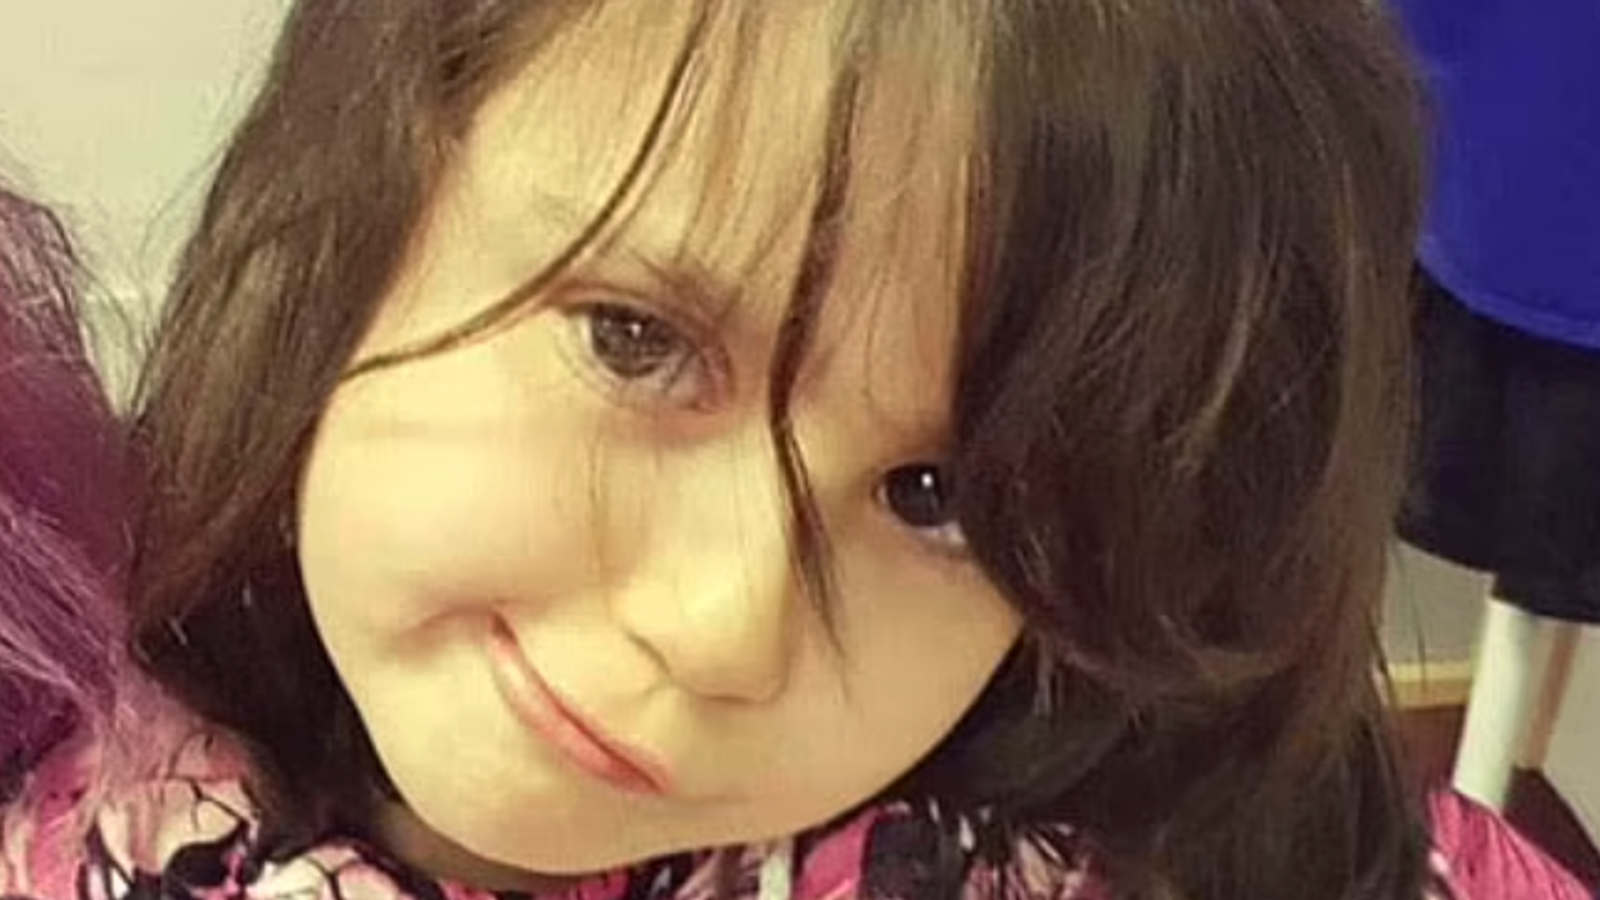 Sara Sharif: 10-year-old found dead at Woking home previously 'known to authorities' - as police continue hunt for father